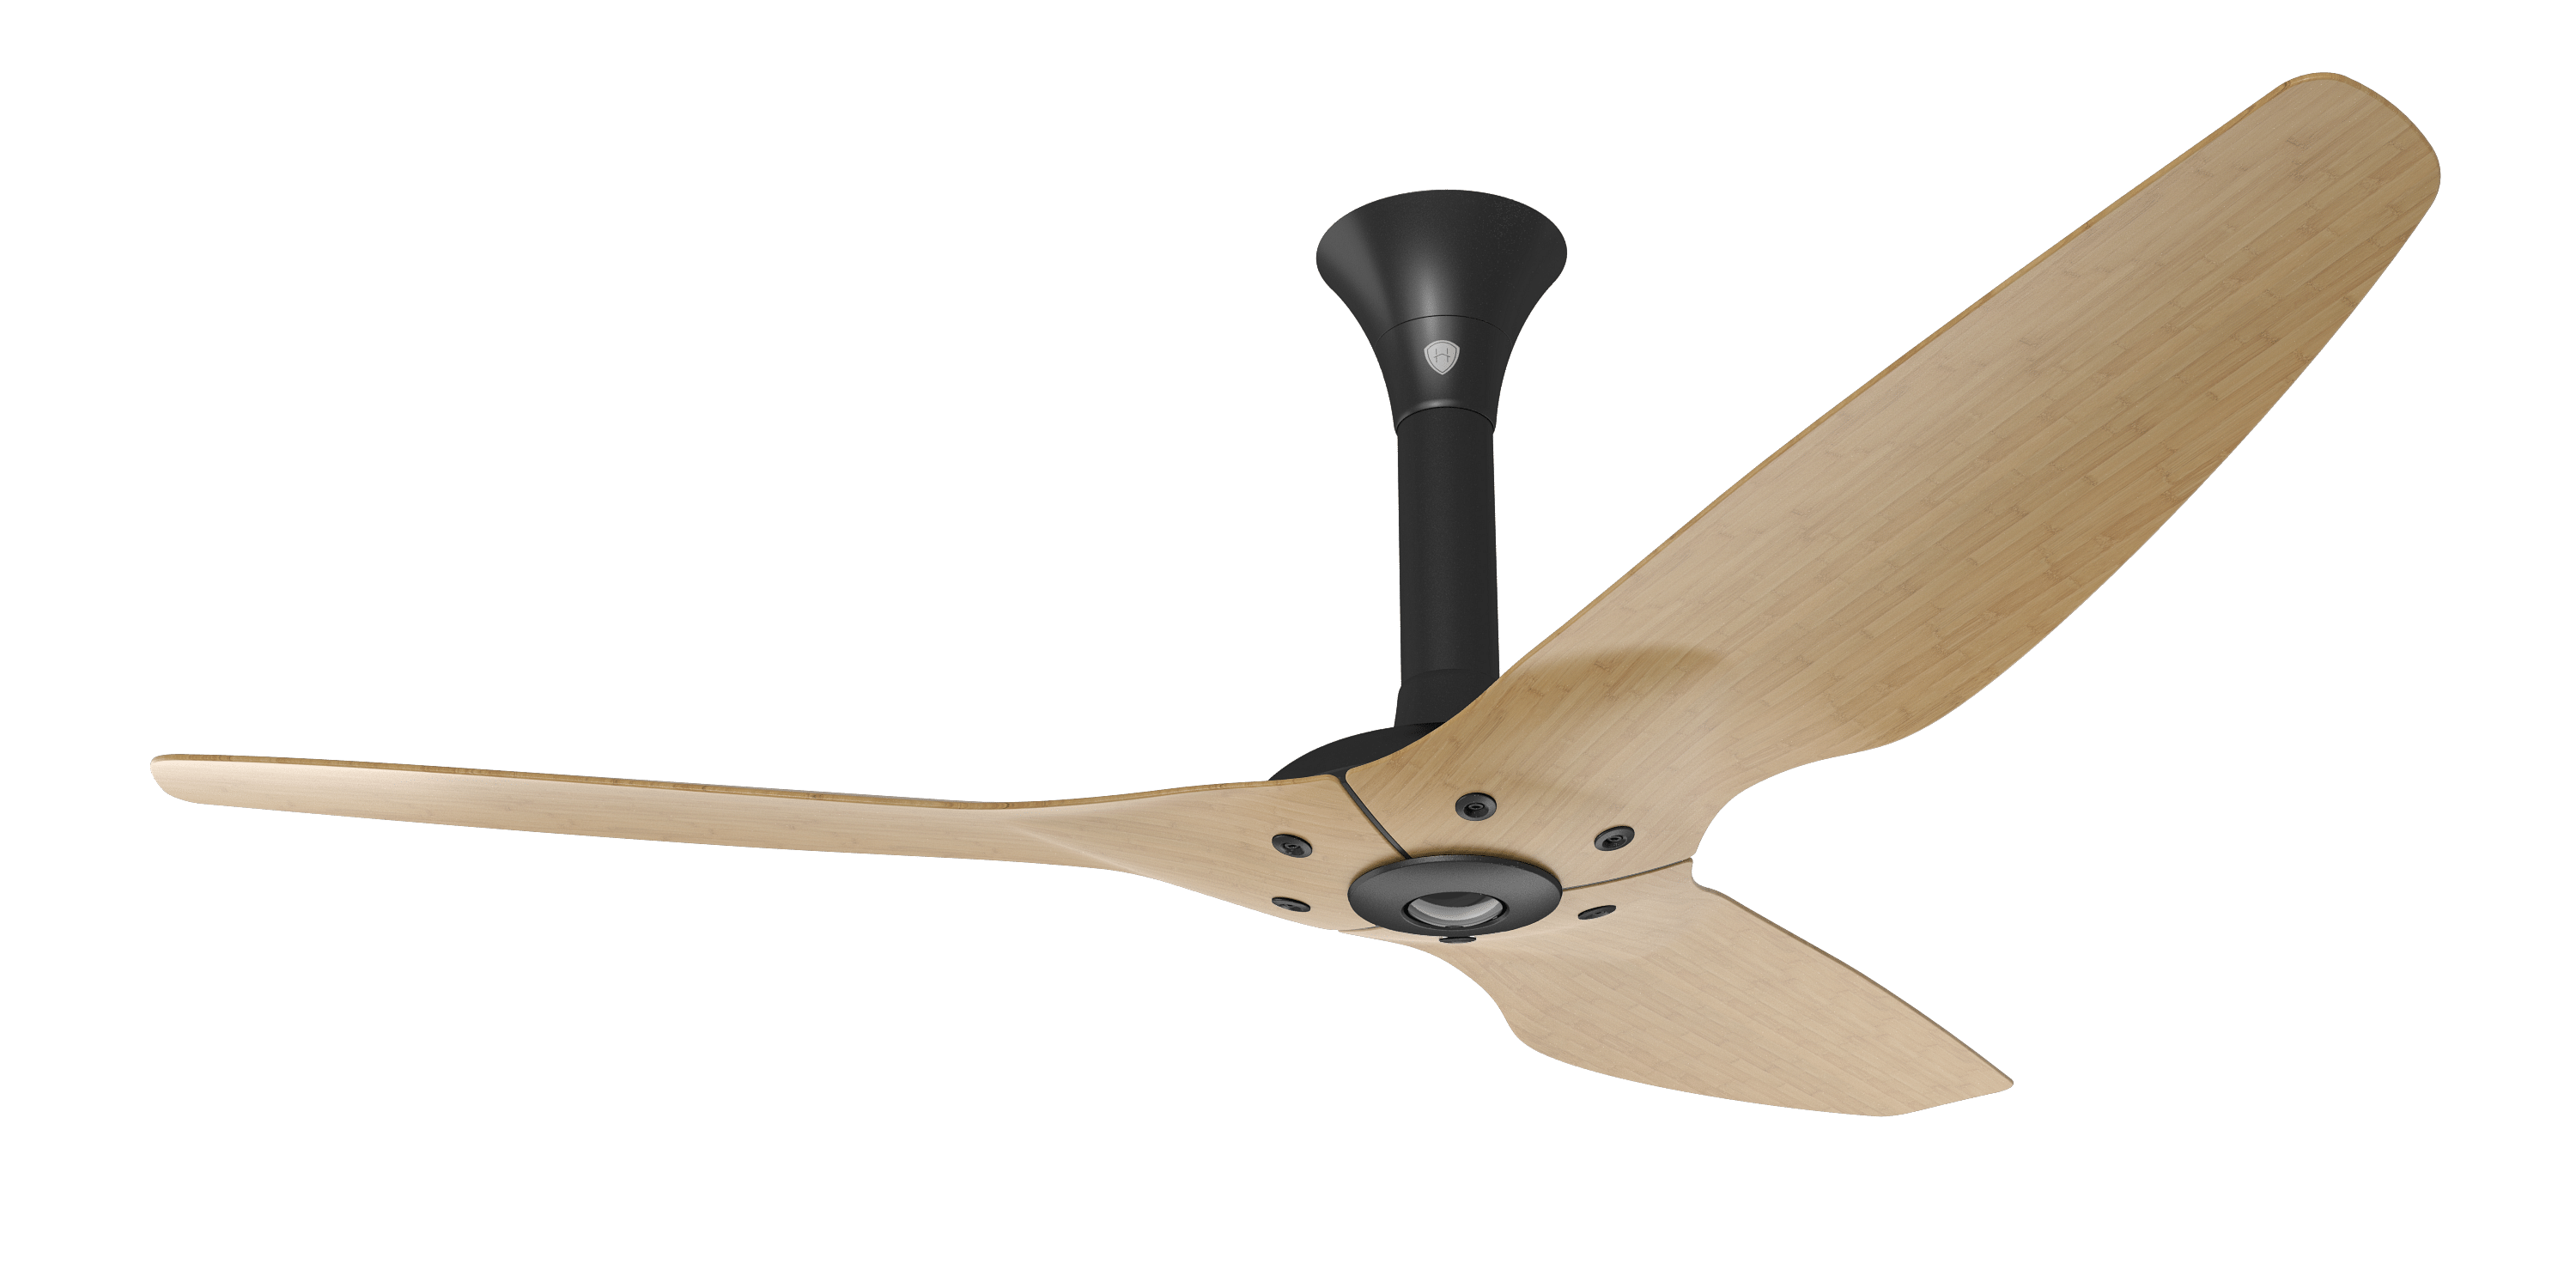 Where To Buy Reliable And Stylish Ceiling Fans Home Decor